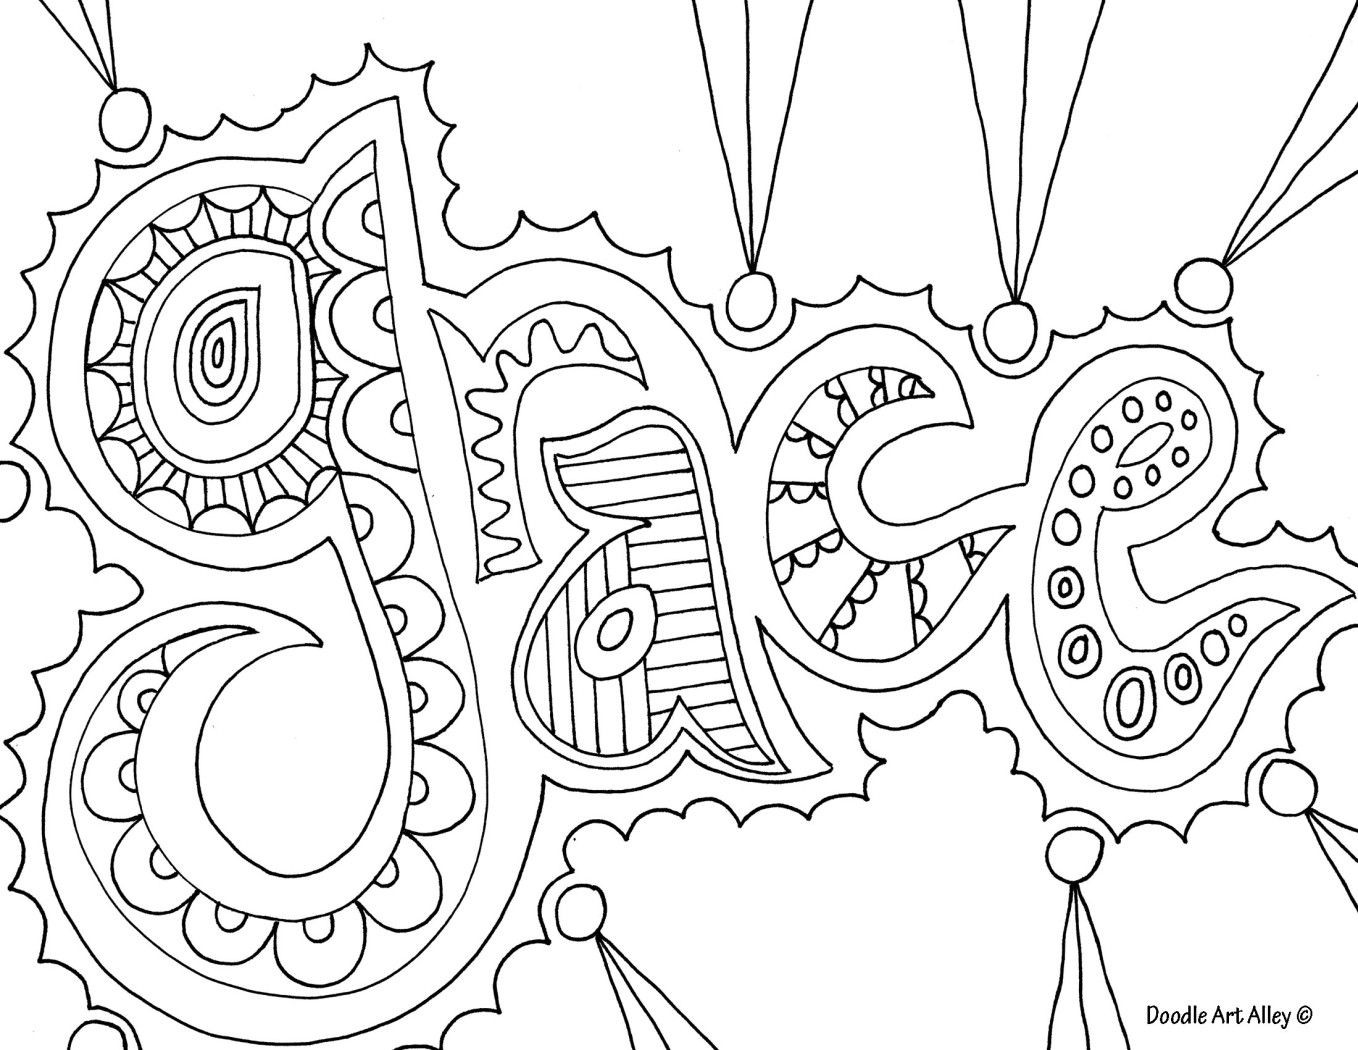 Printable Coloring Pages For Teens No Words
 Doodle art grace nice coloring page for older kids